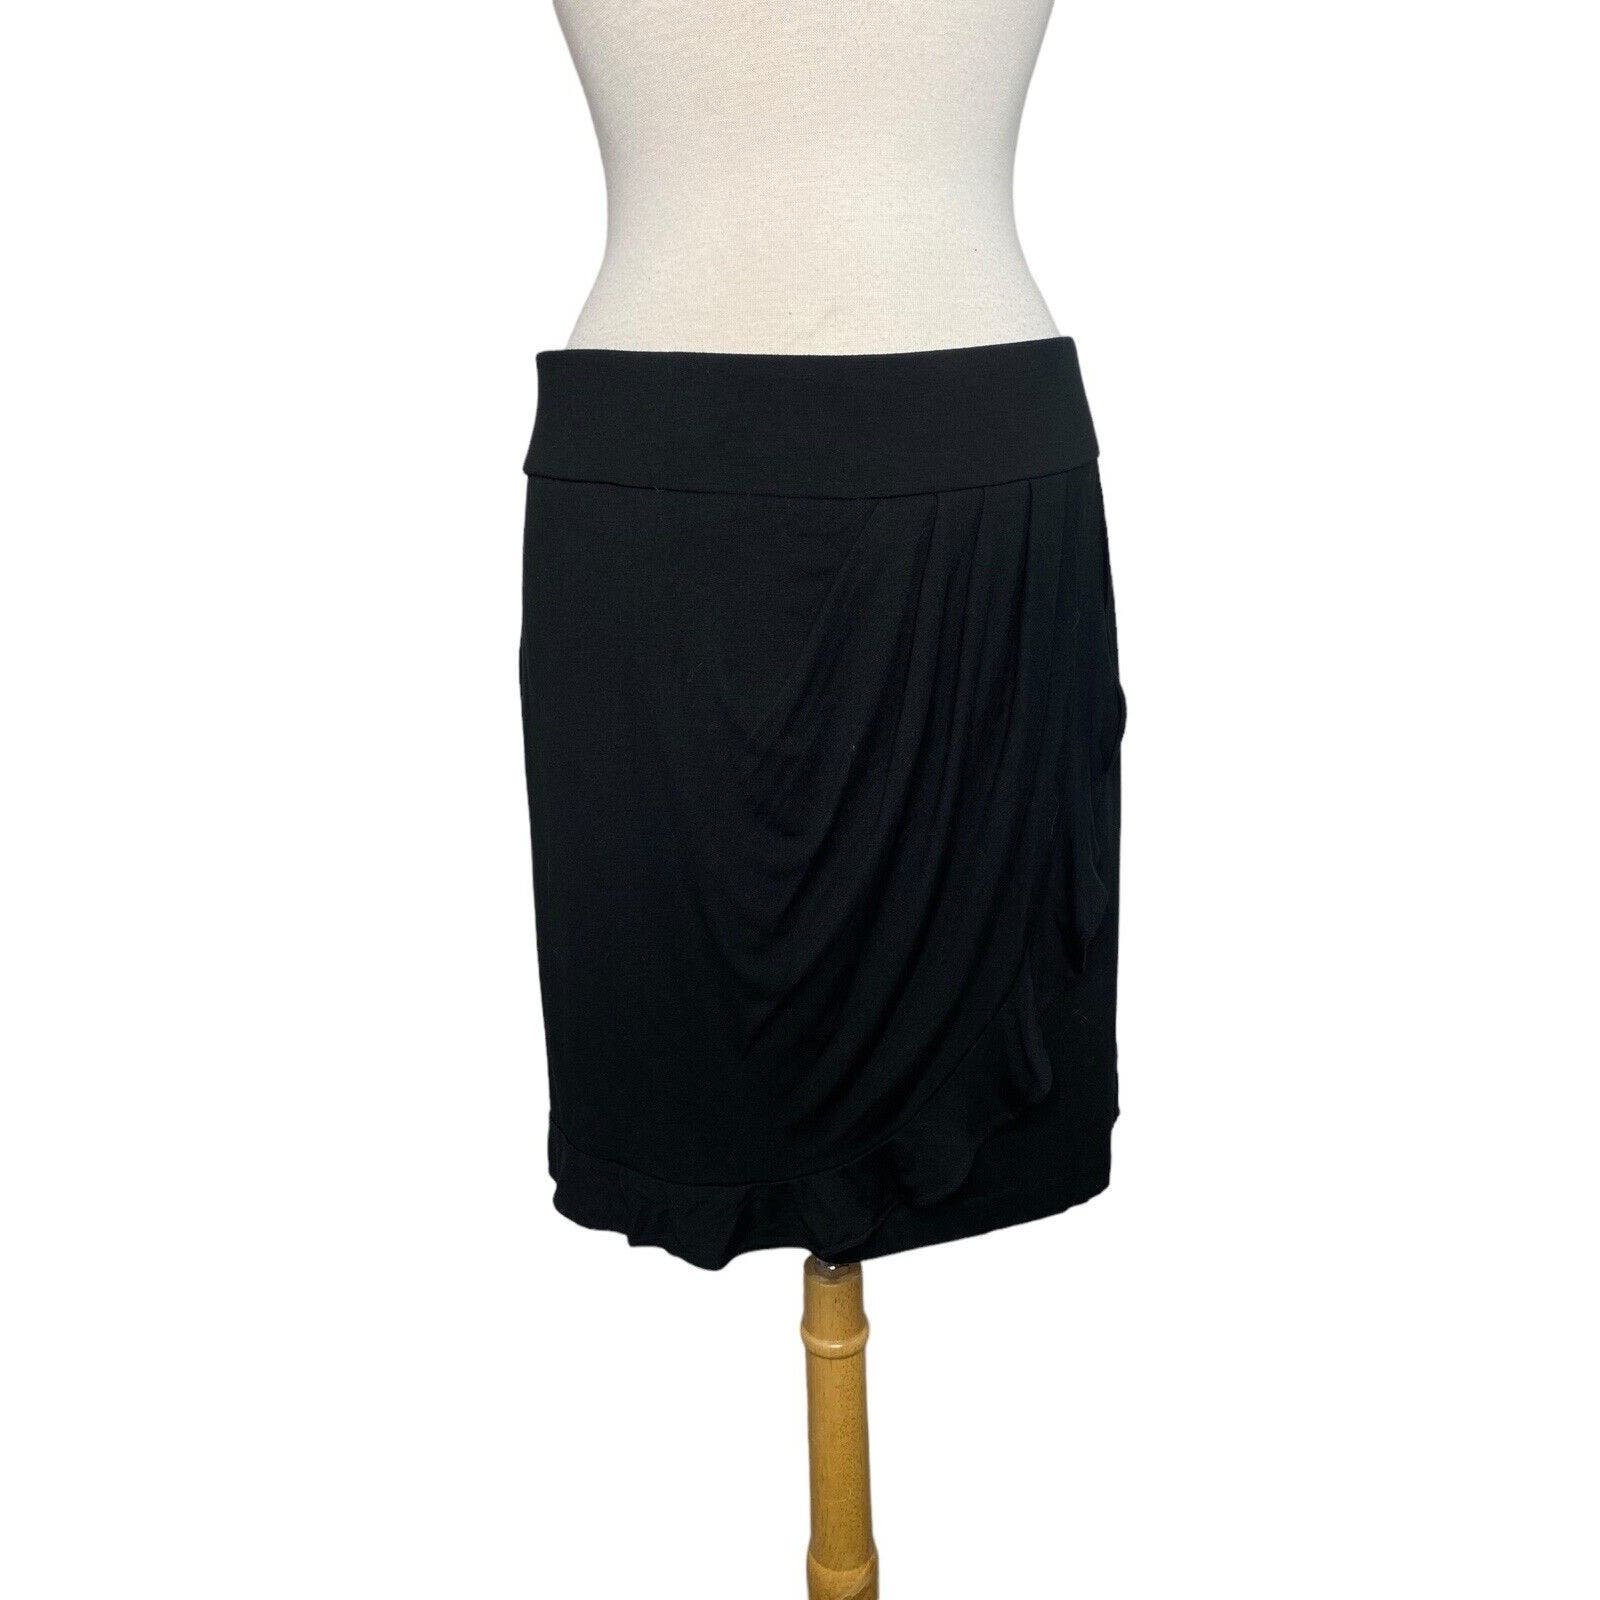 Discounted LOFT Black Pull On Faux Wrap Ruffle Skirt Size Medium Mini Coverup Modal P6zPTgg8V just for you